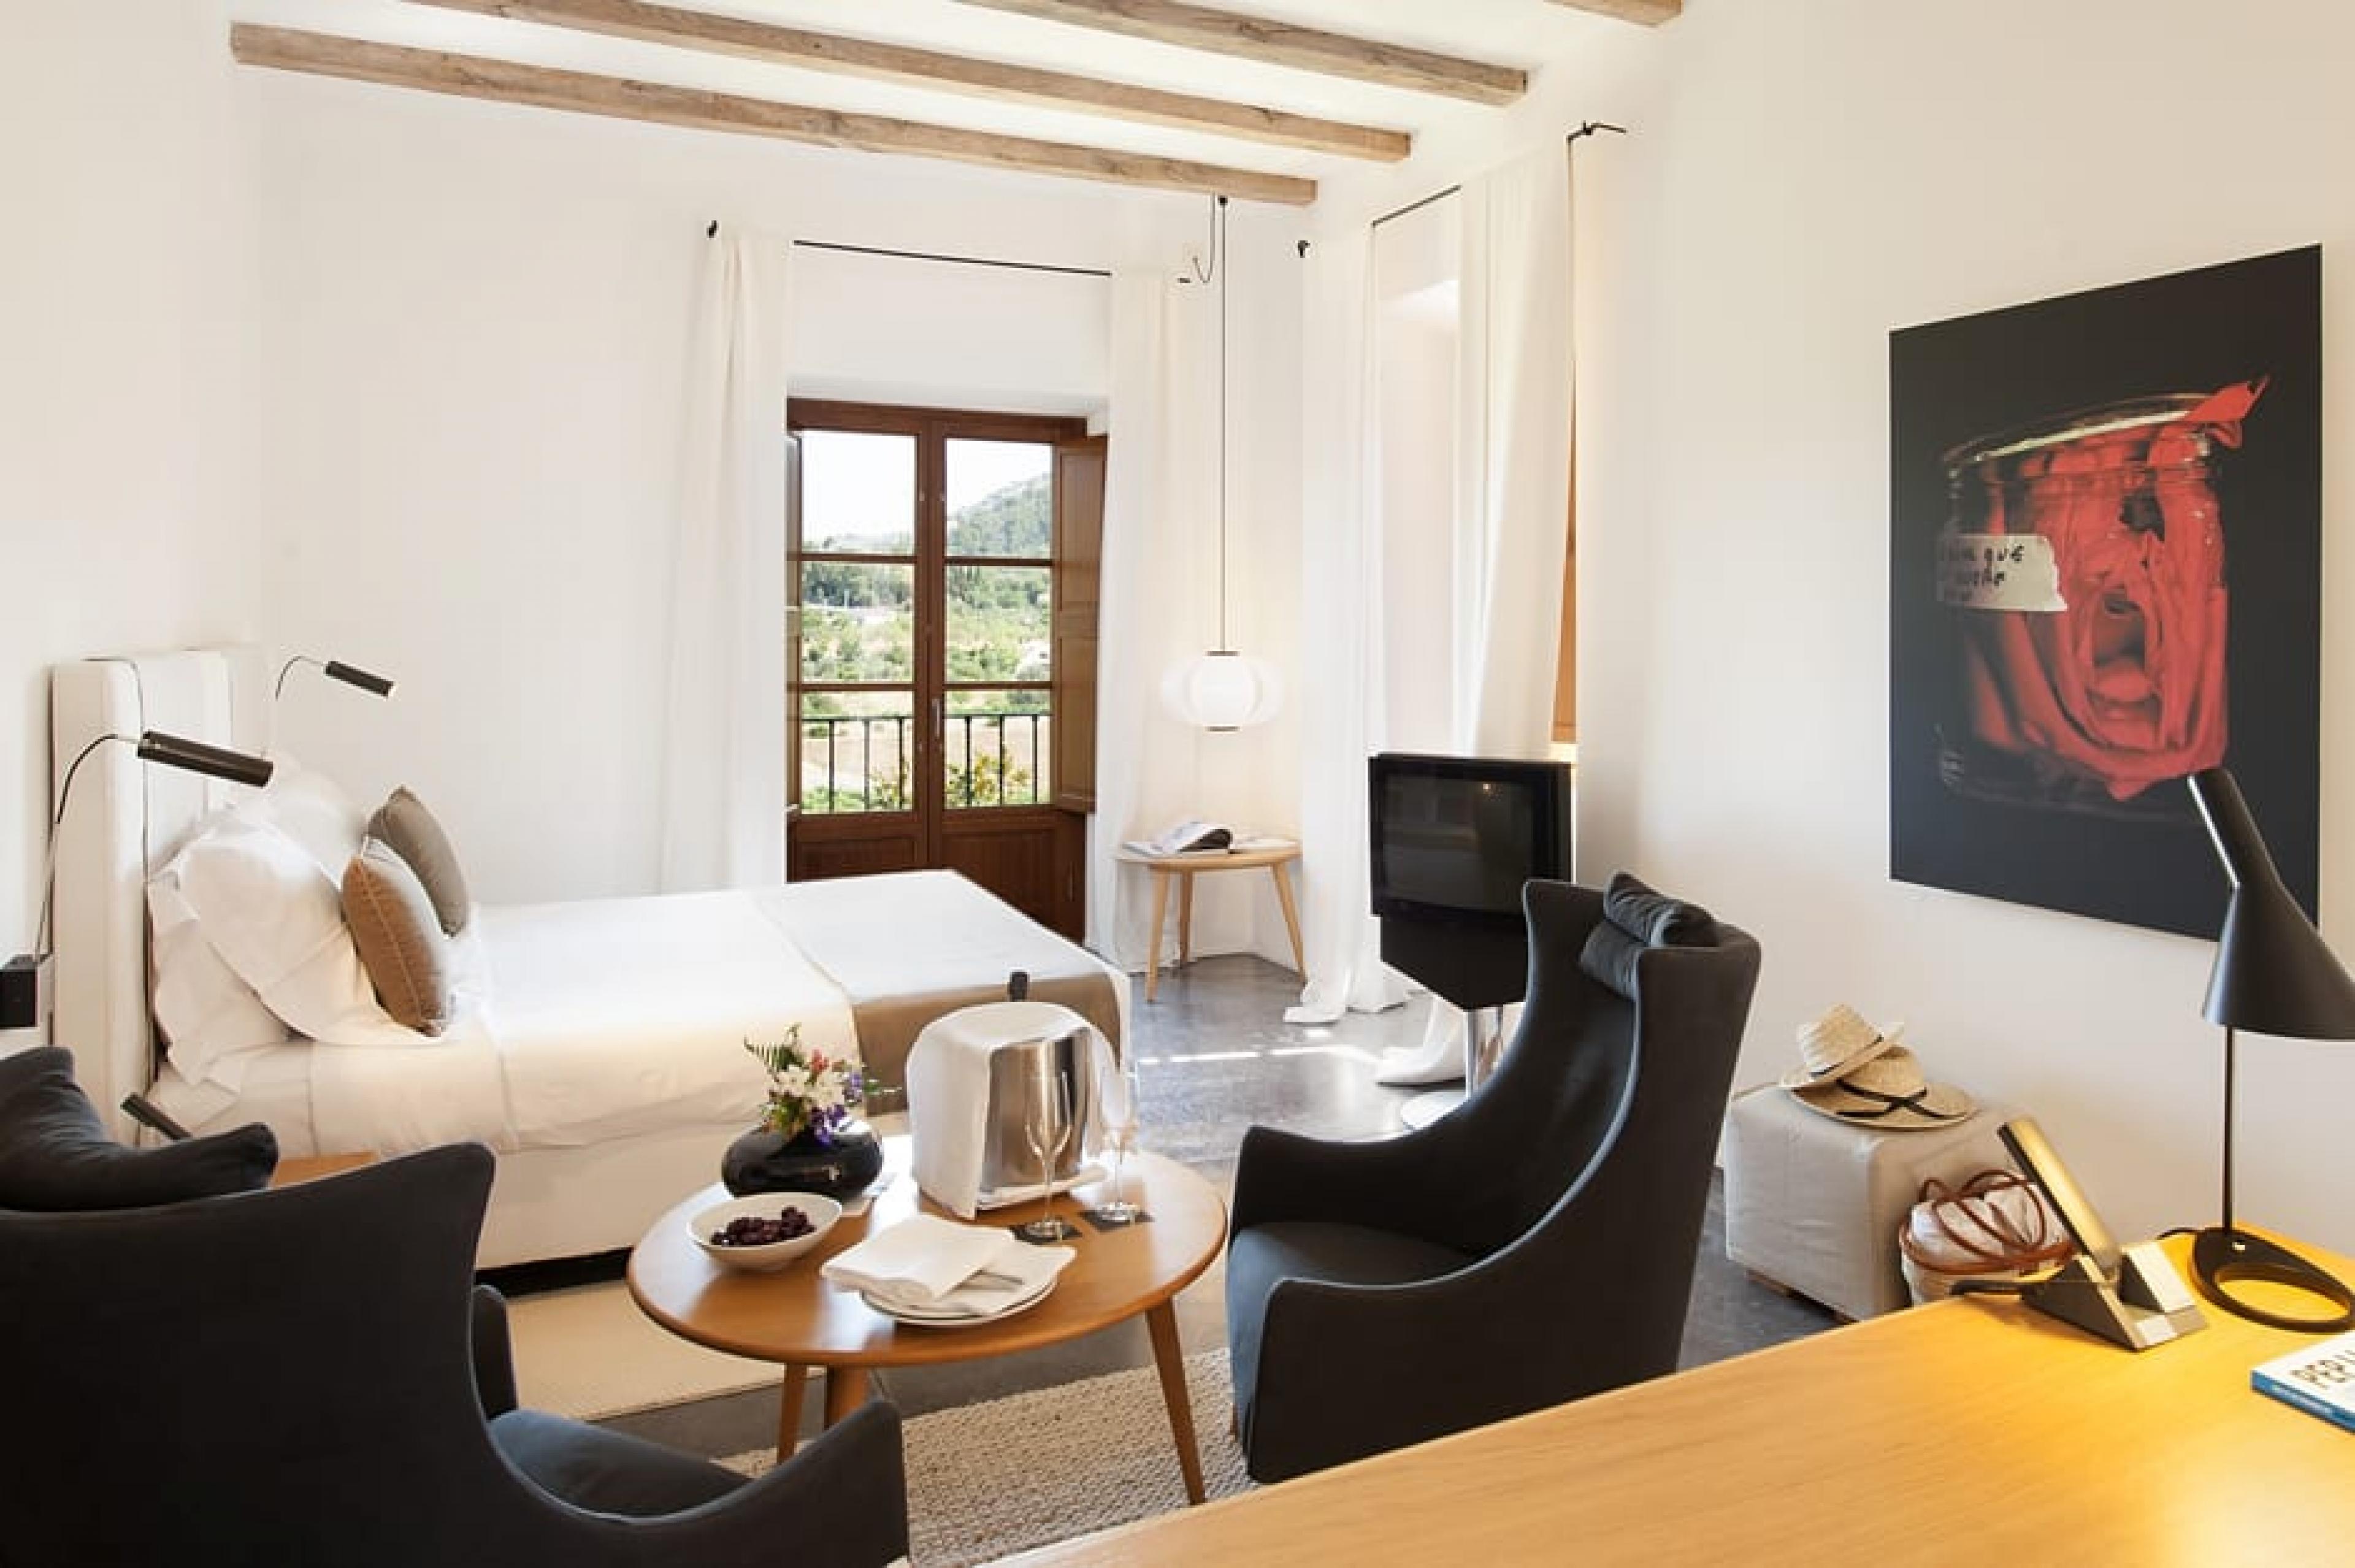 Suite at  Son Brull, Mallorca, Spain